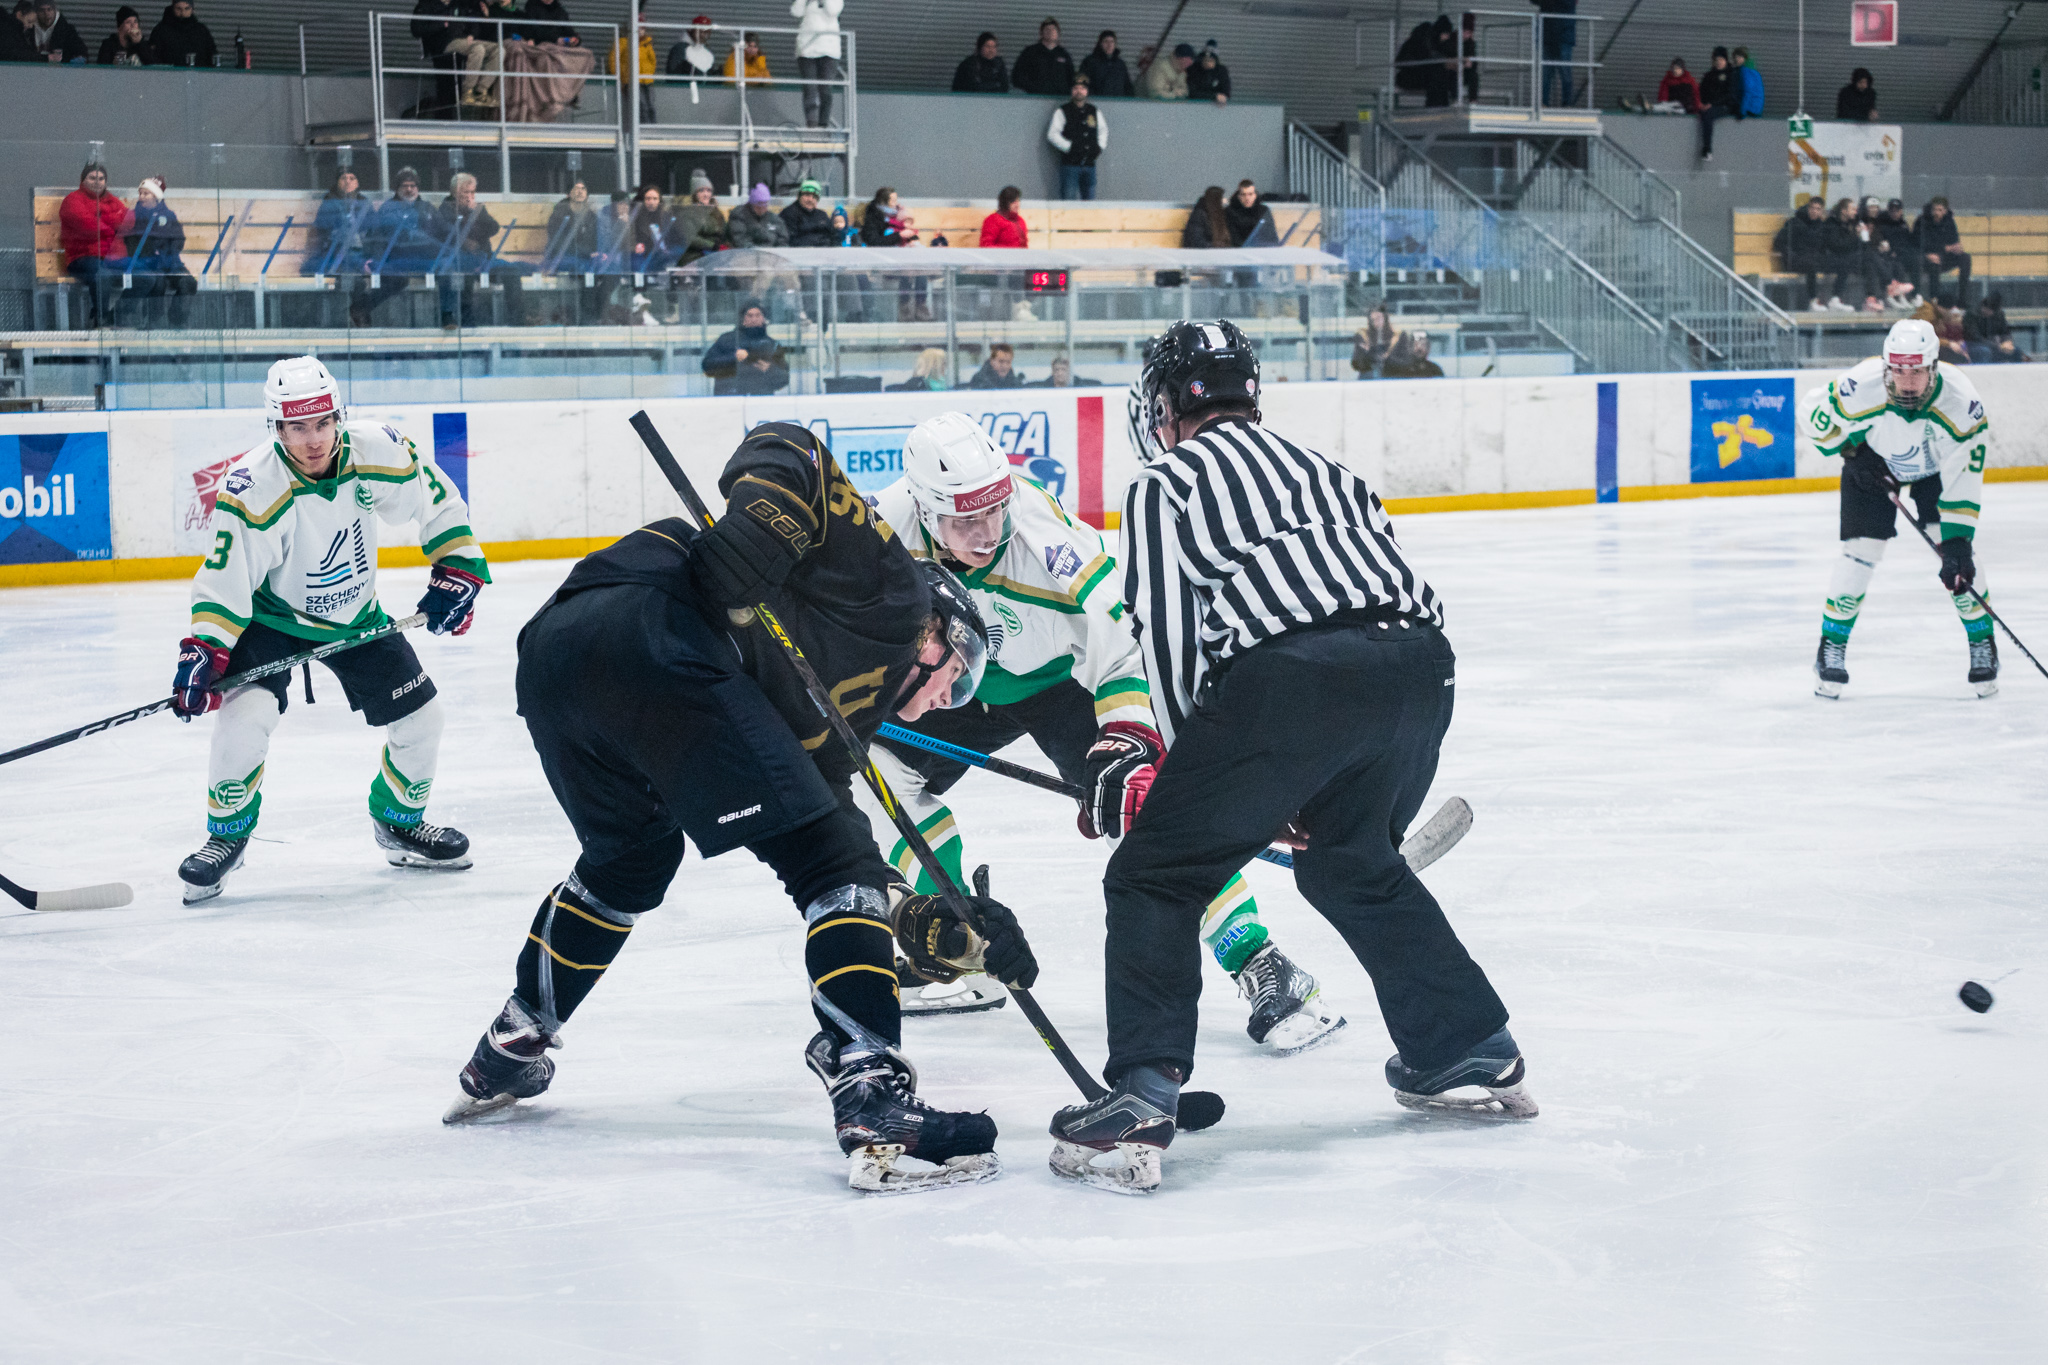 The tournament started with the clash between UNI Győr ETO HC and the UMB Hockey Team from Banská Bystrica (Photo: Csaba József Májer)